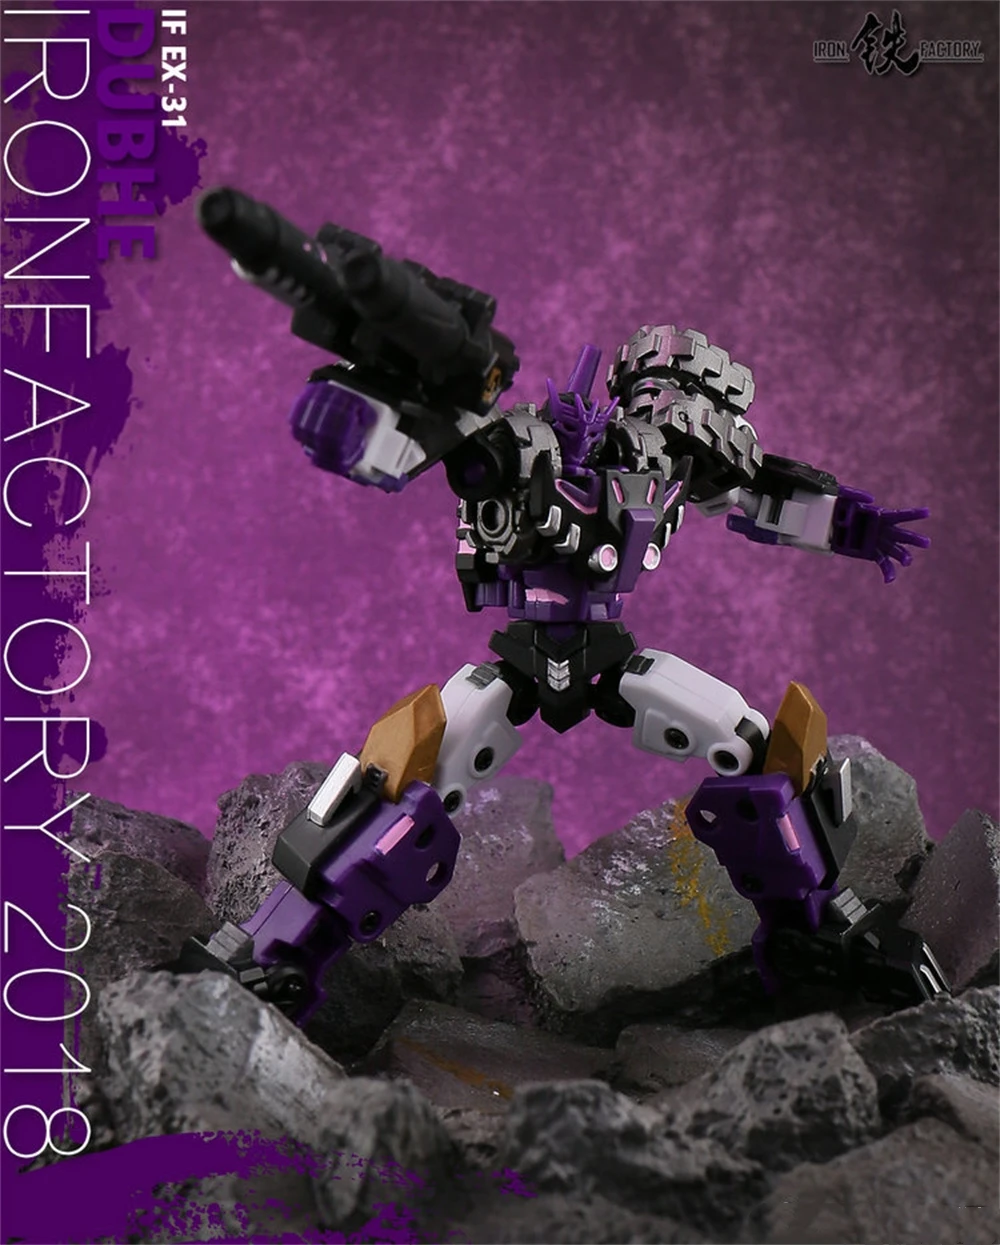 

Transformation Ironfactory IF EX-31 EX31 DUBHE Tarn Standard Edition Action Figure Robot Toy With Box IN STOCK